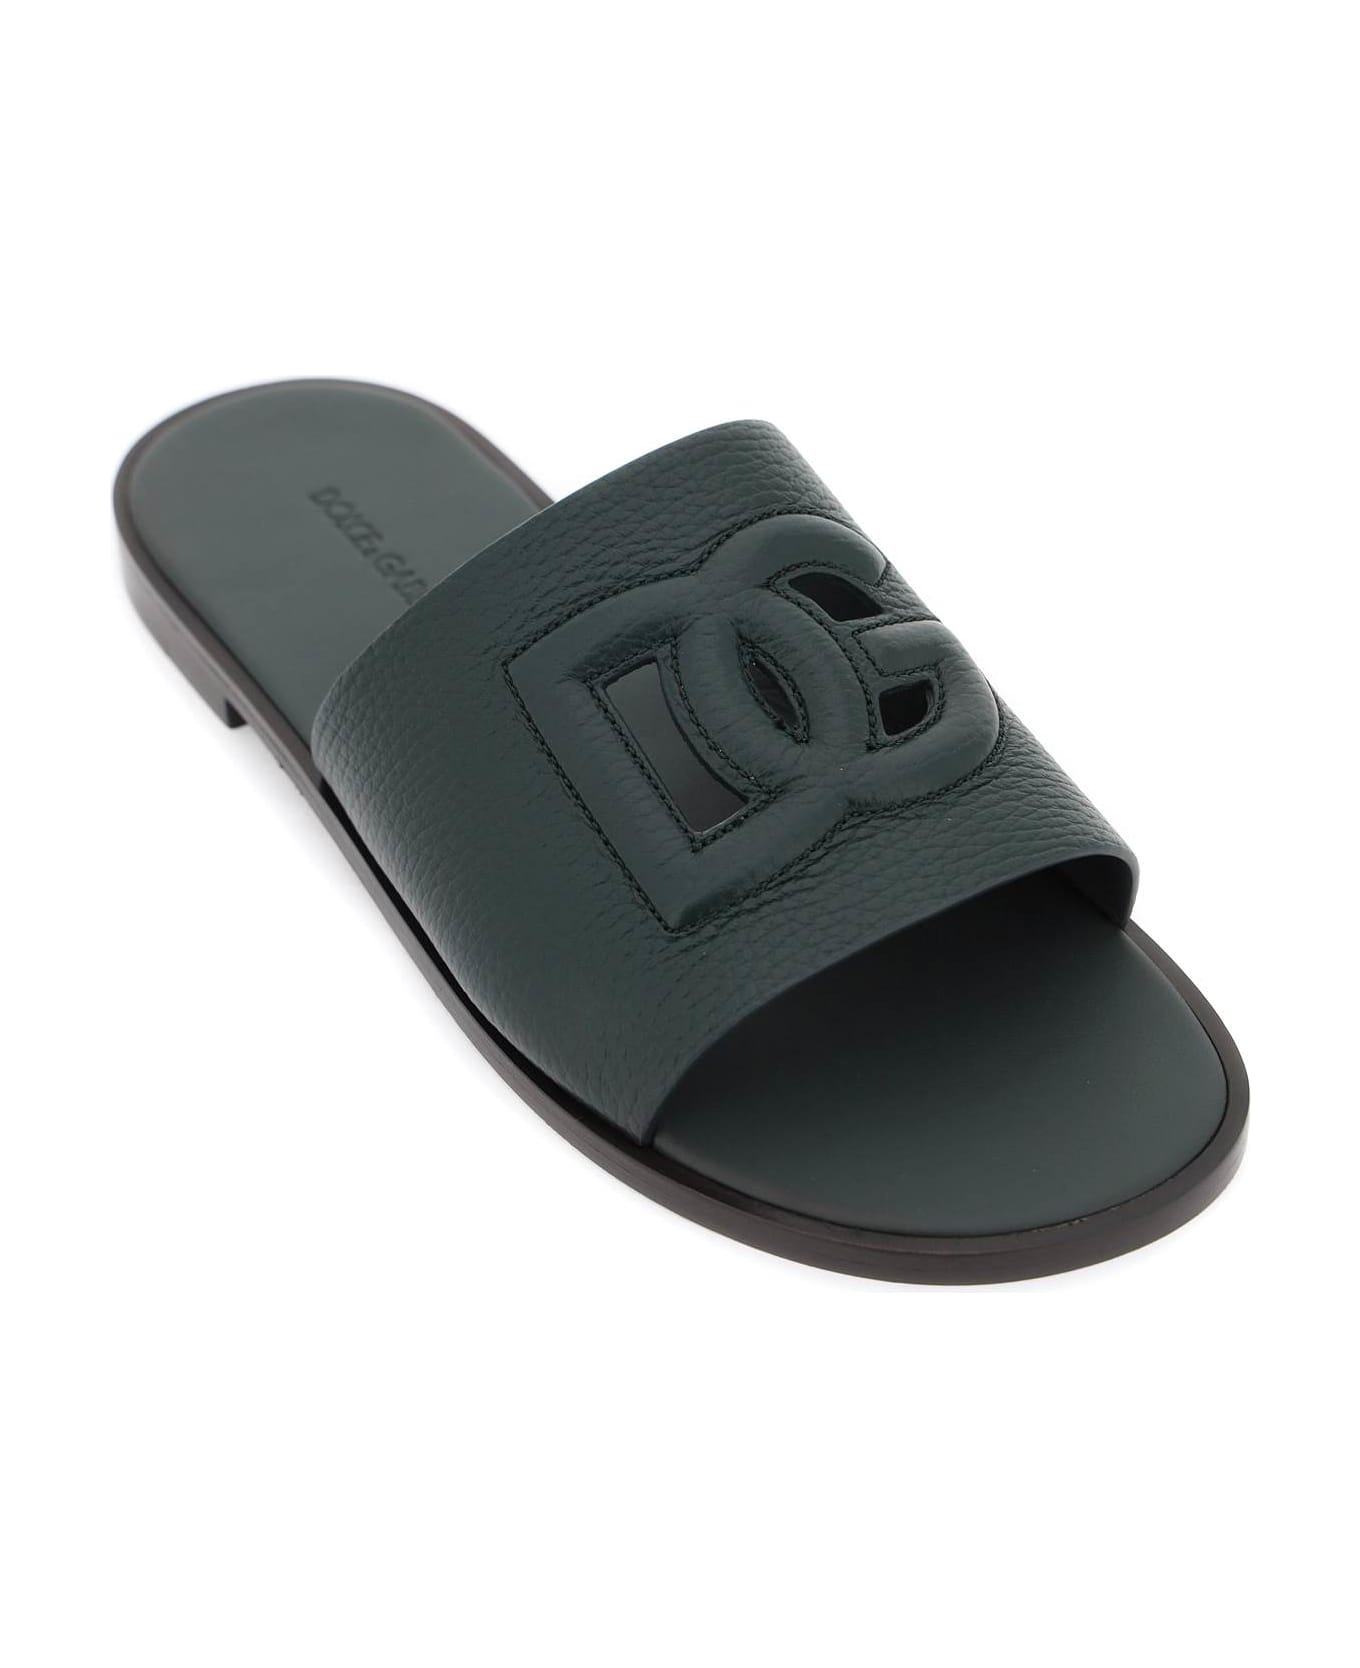 Dolce & Gabbana Cut-out Logo Leather Slides - VERDE SCURO 3 (Green)